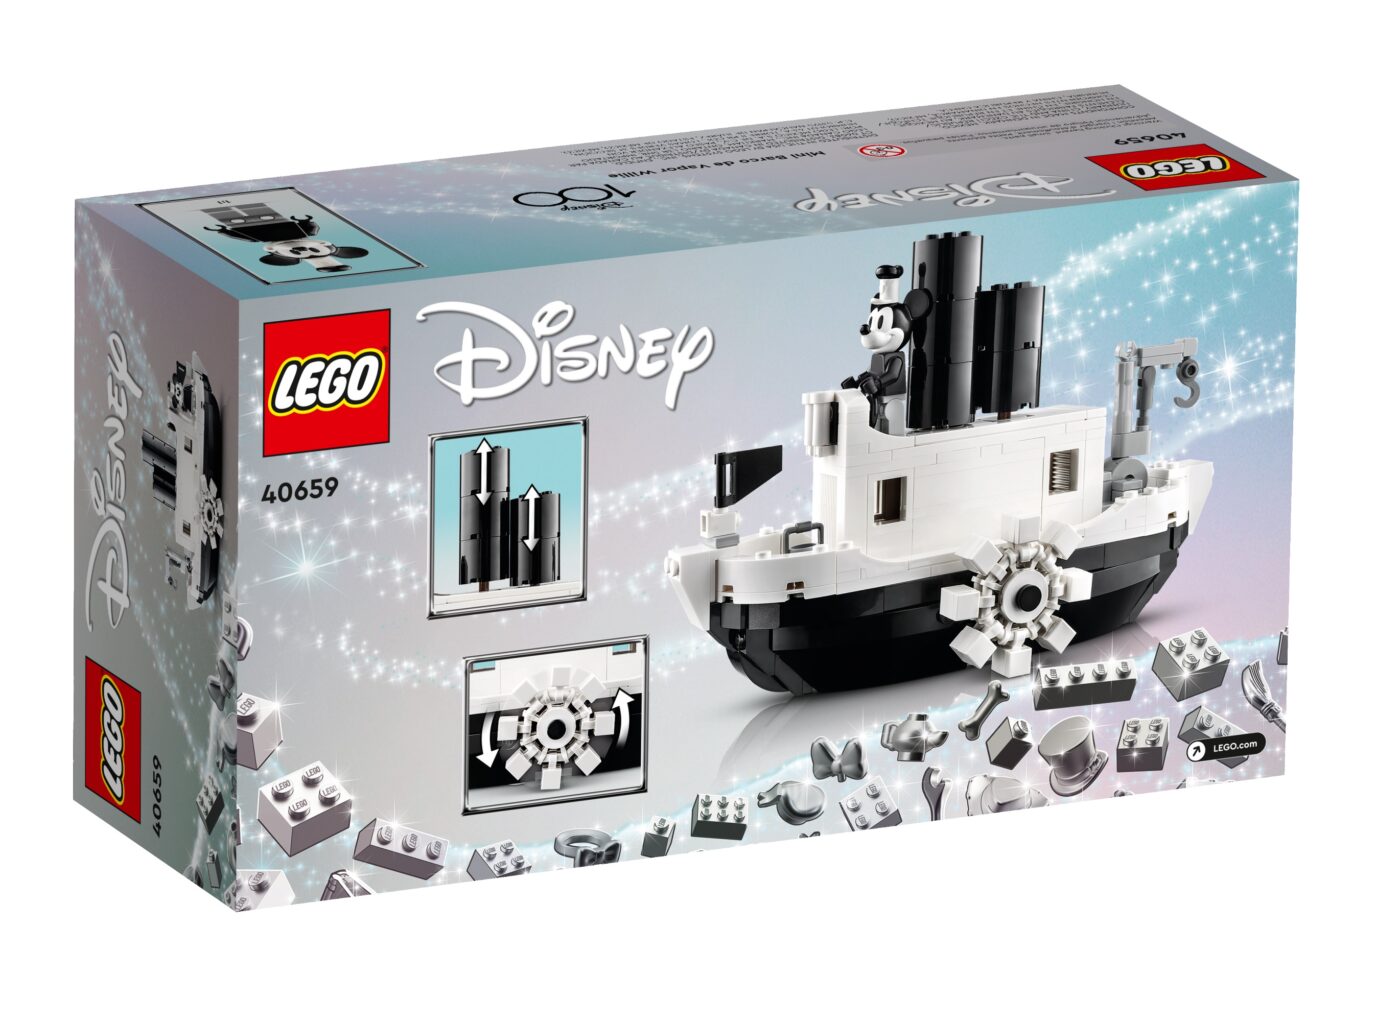 LEGO 40659 Mini Steamboat Willie GWP revealed to have mechanical functions!5